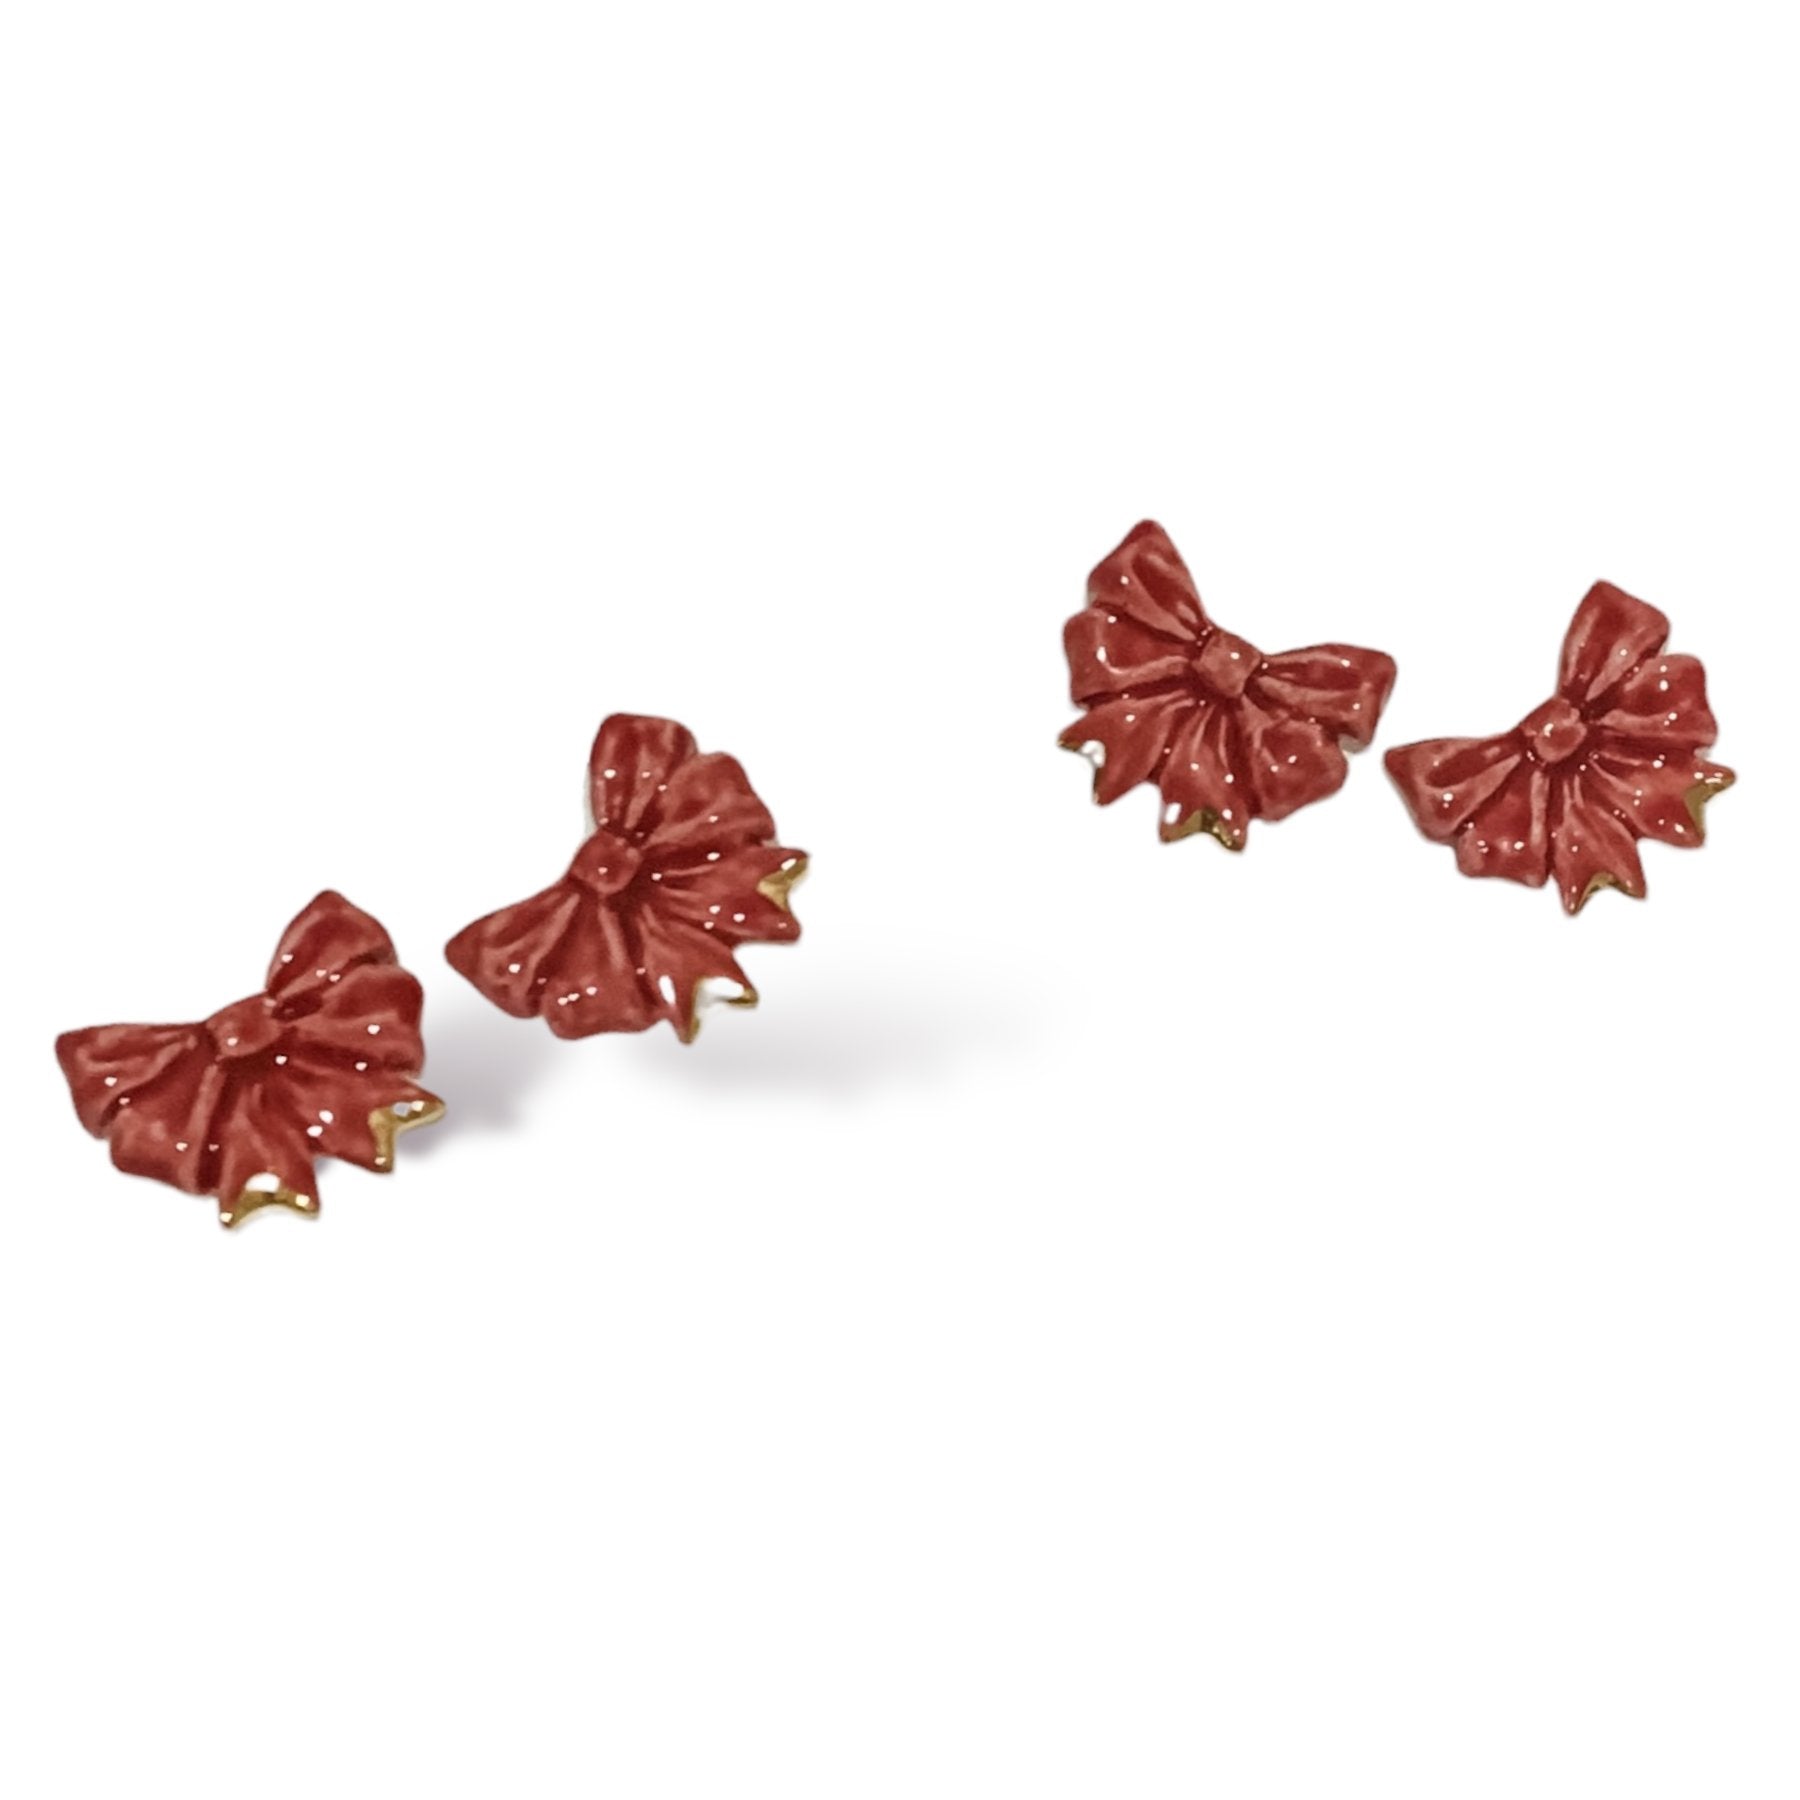 red-bow-studs-by-susan-gordon-pottery-accessories-jewelry-earrings-georgia-kate